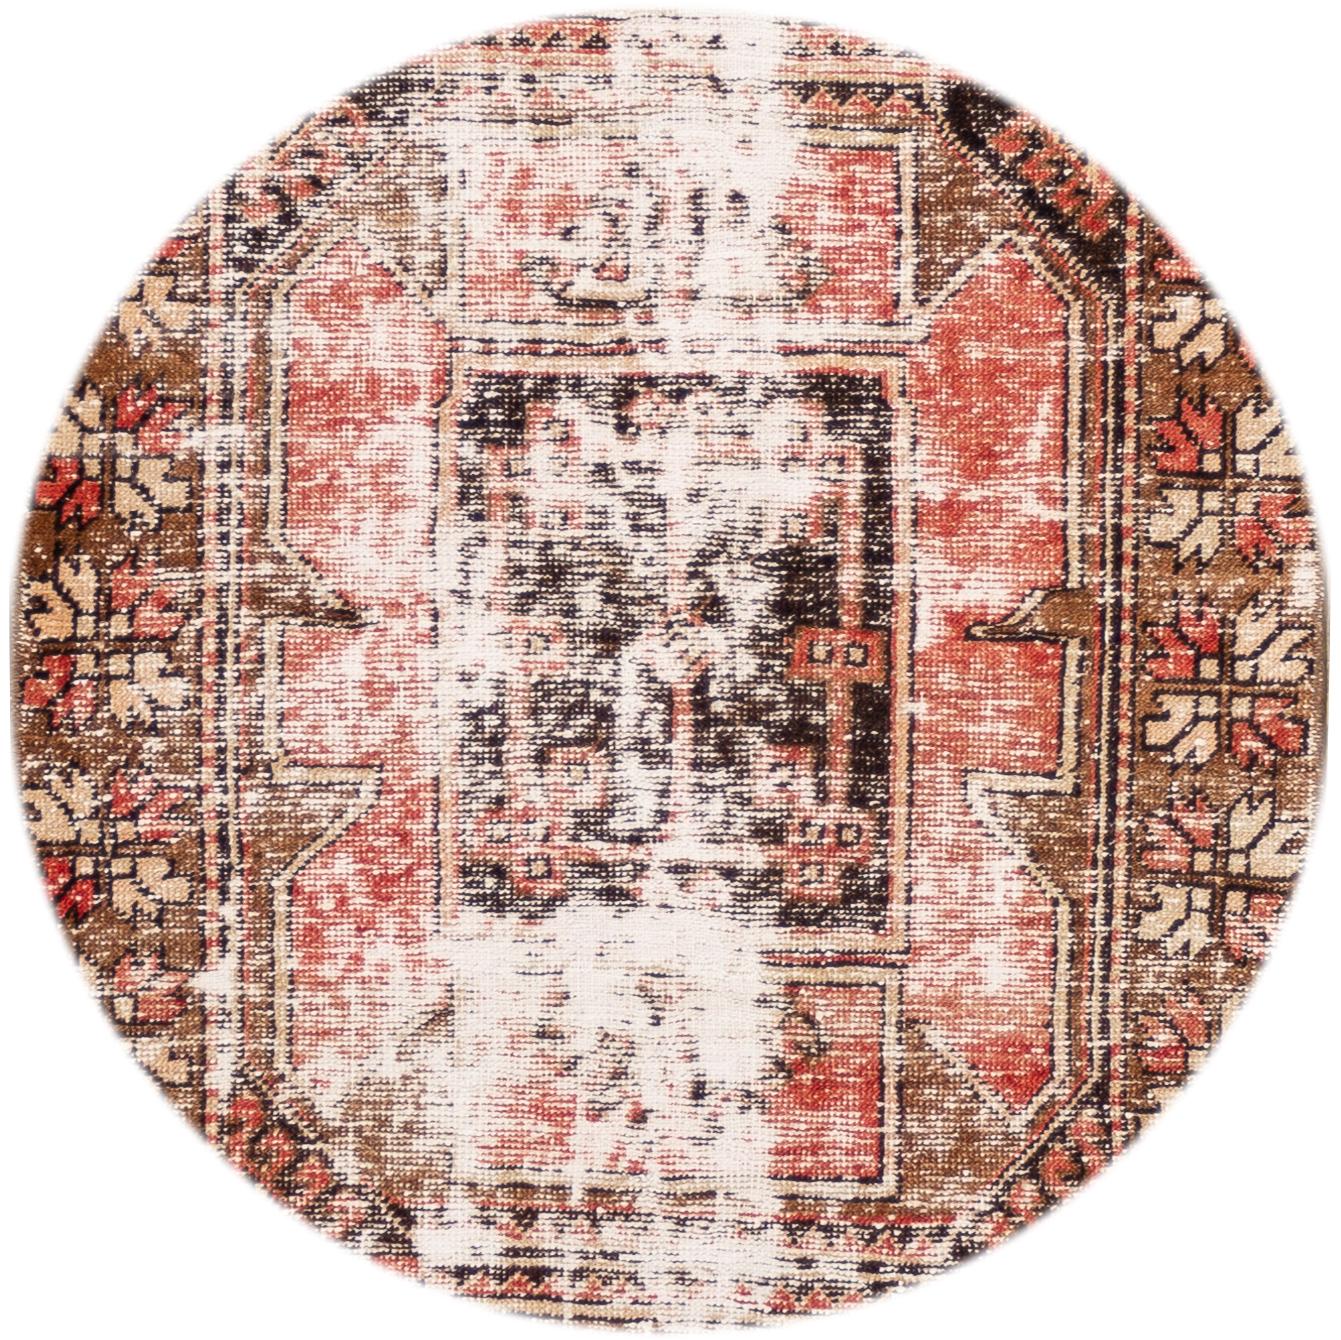 Beautiful antique Turkish Anatolian runner rug, hand knotted wool with a red field, brown and tan accents in an all-over multi medallion design,
circa 1930s.
This rug measures 2' 11